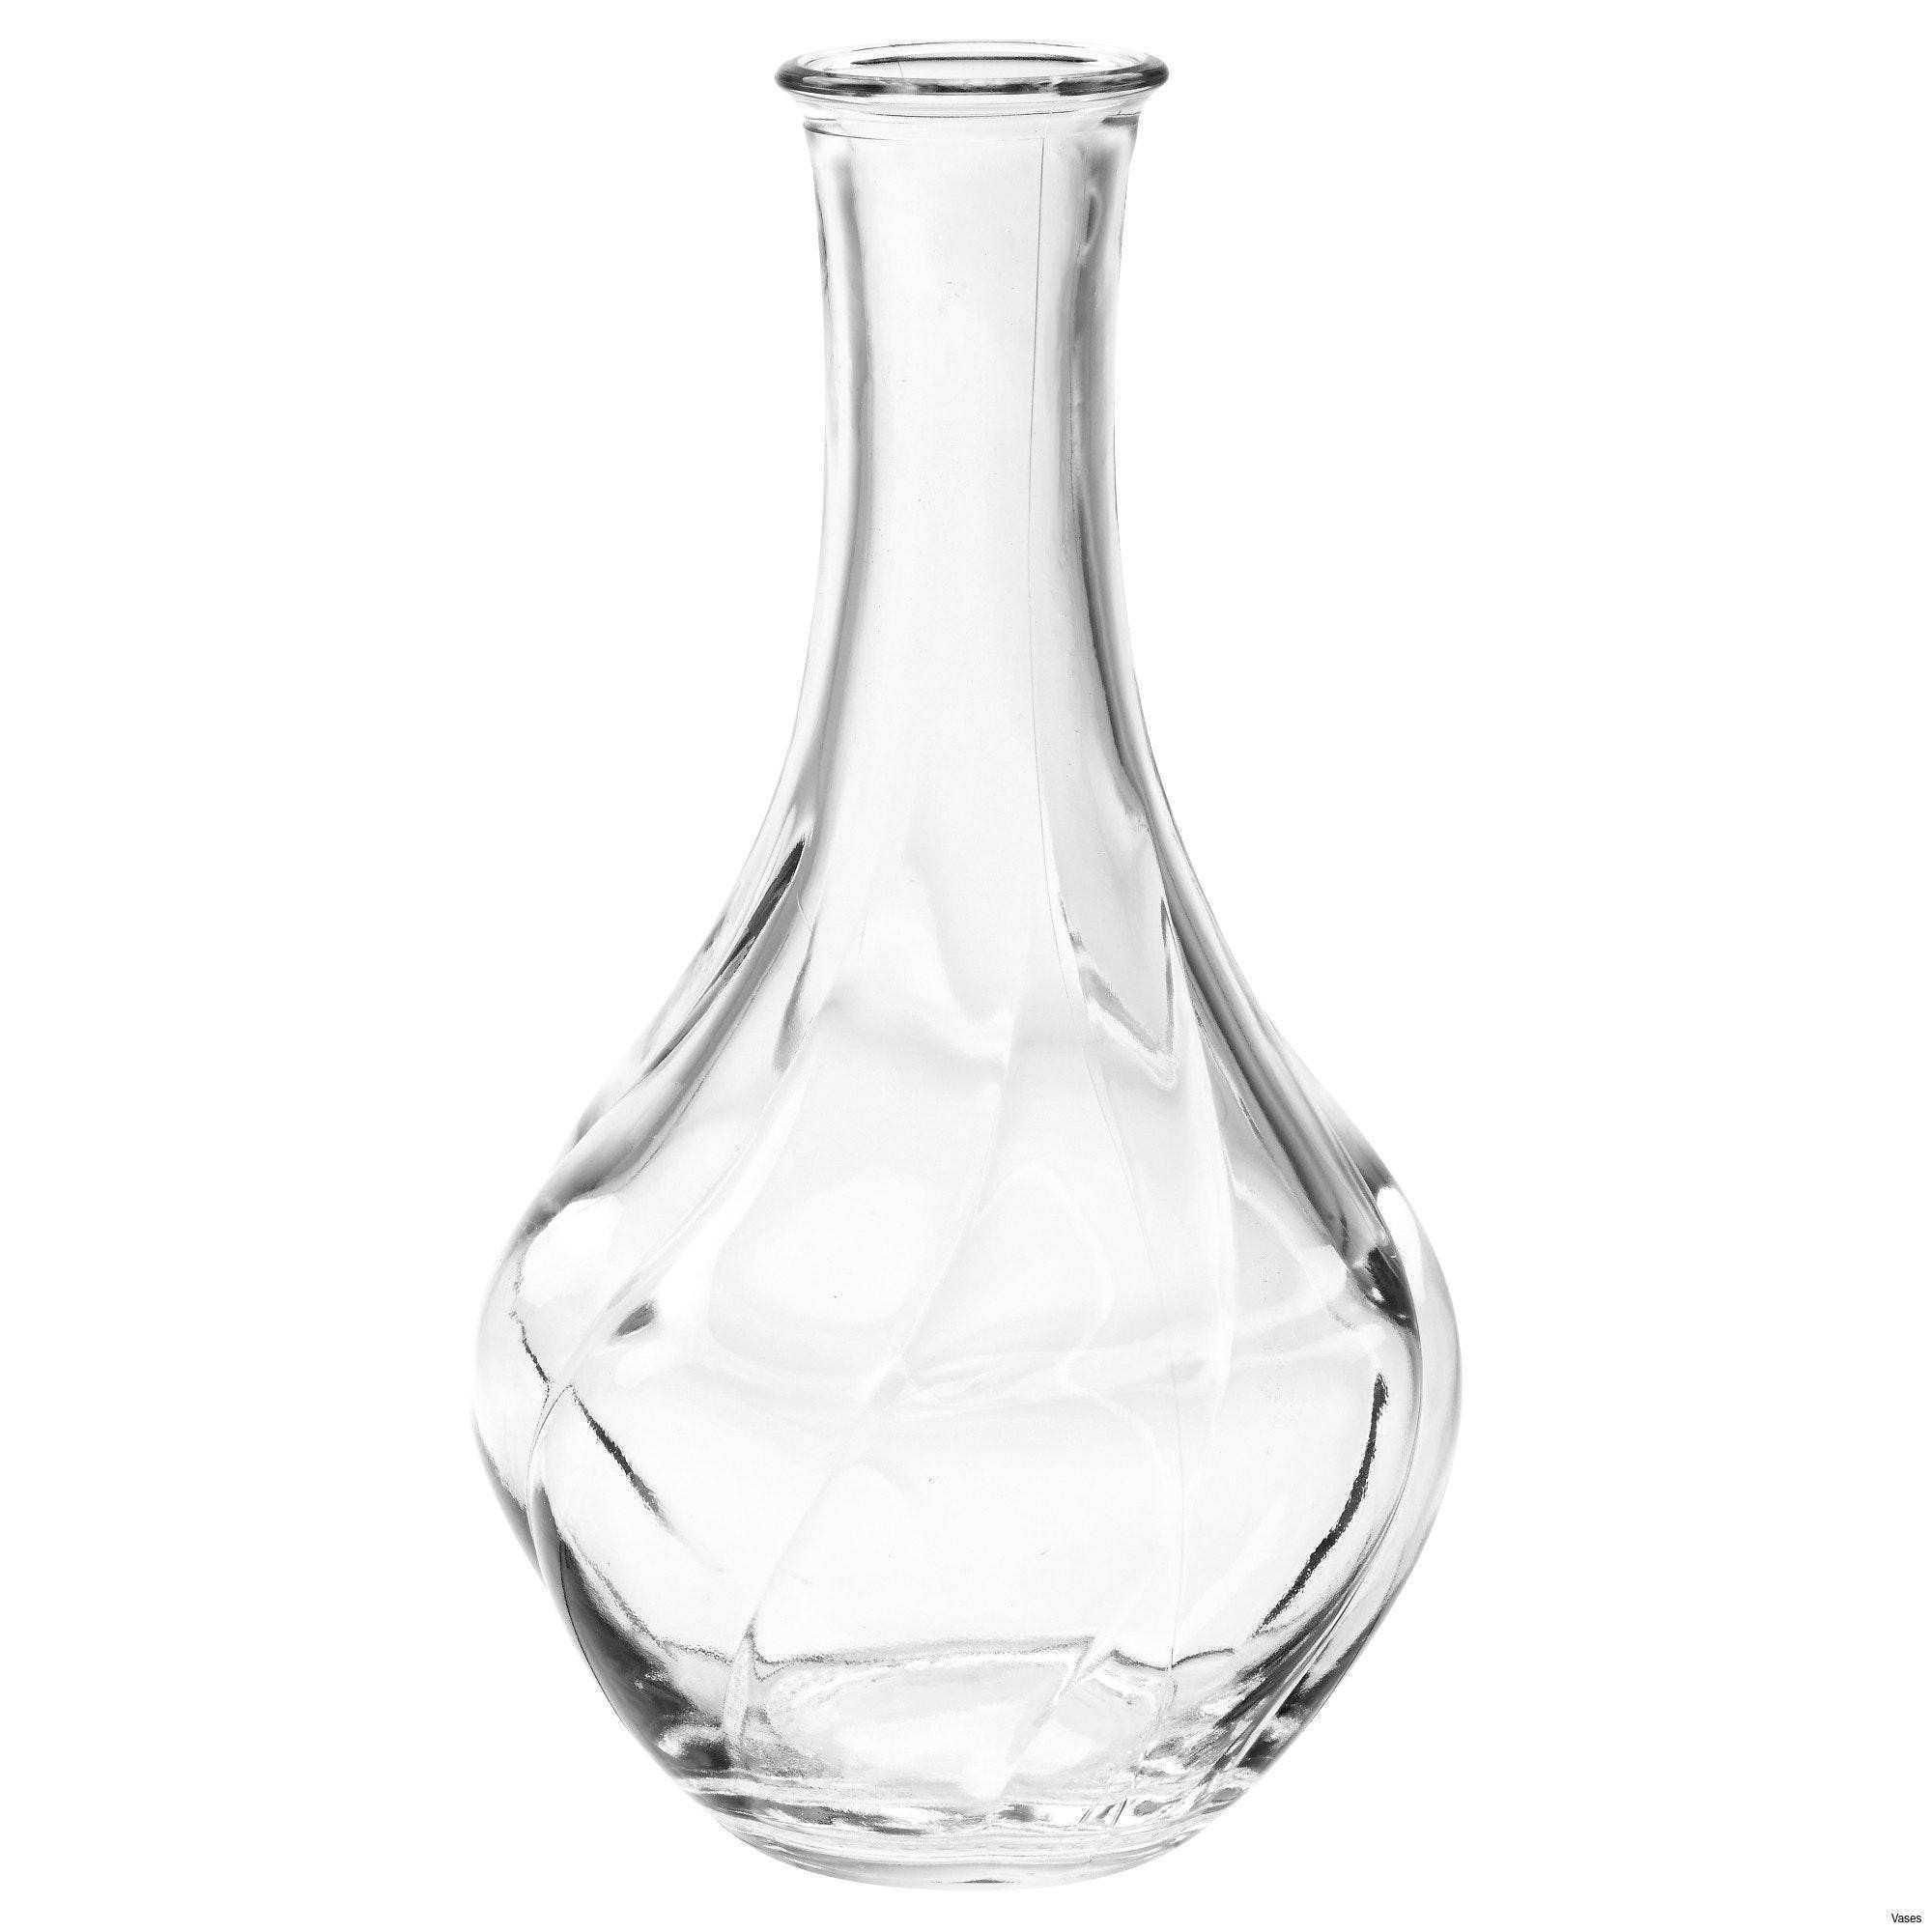 candle vases in bulk of small glass vase photos vases floating candle vase set glass regarding small glass vase pics small outdoor lights best living room glass vases fresh clear of small